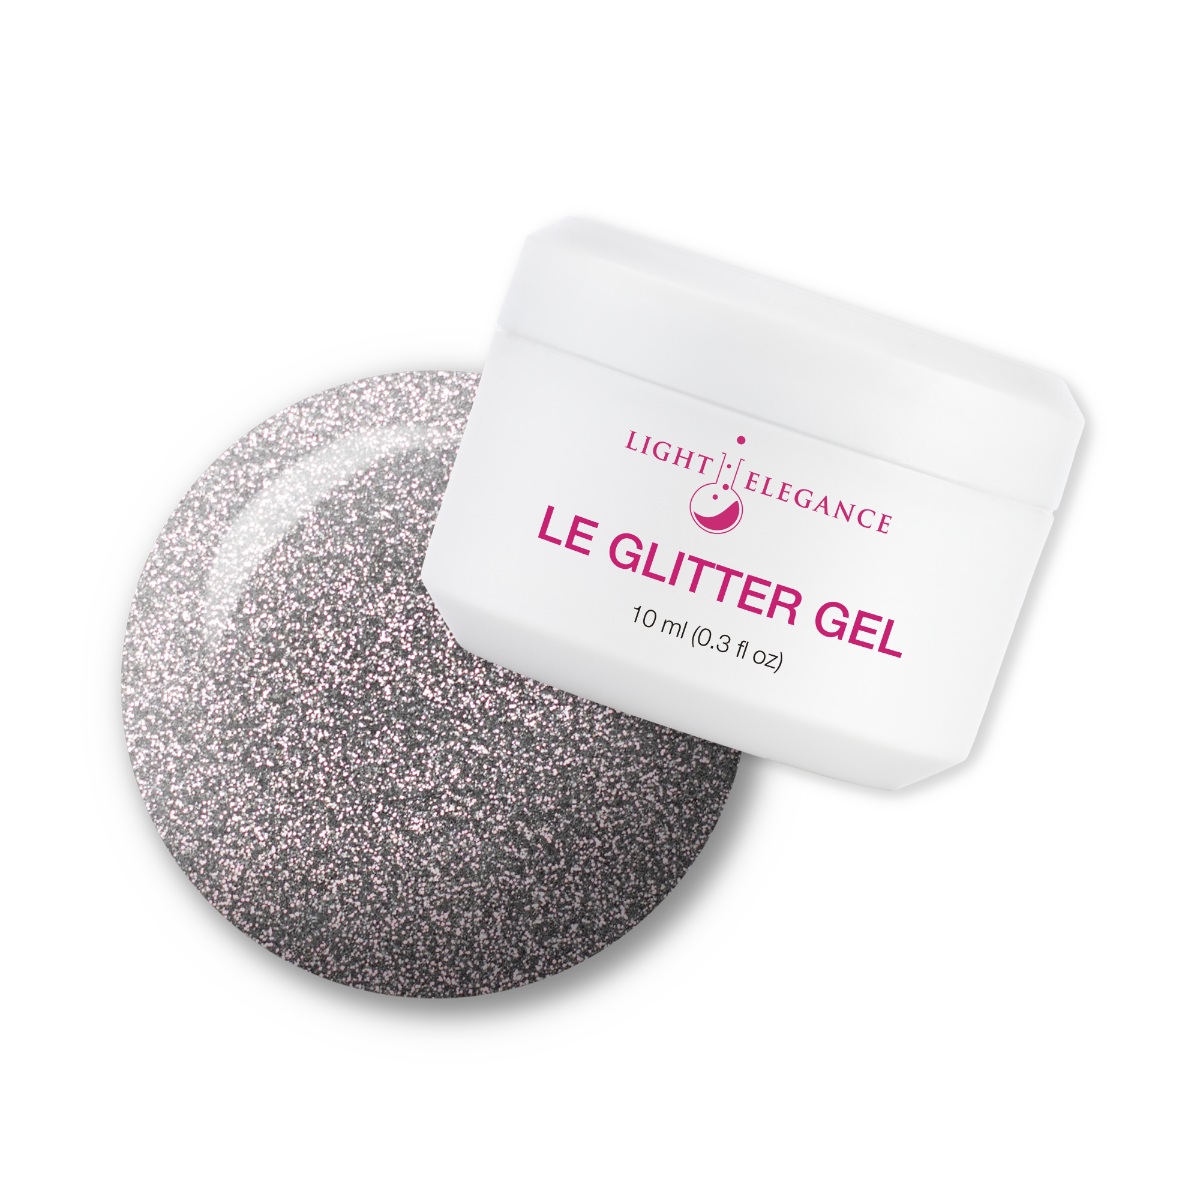 Light Elegance Glitter Gel - Silver Sparkle :: New Packaging - Creata Beauty - Professional Beauty Products